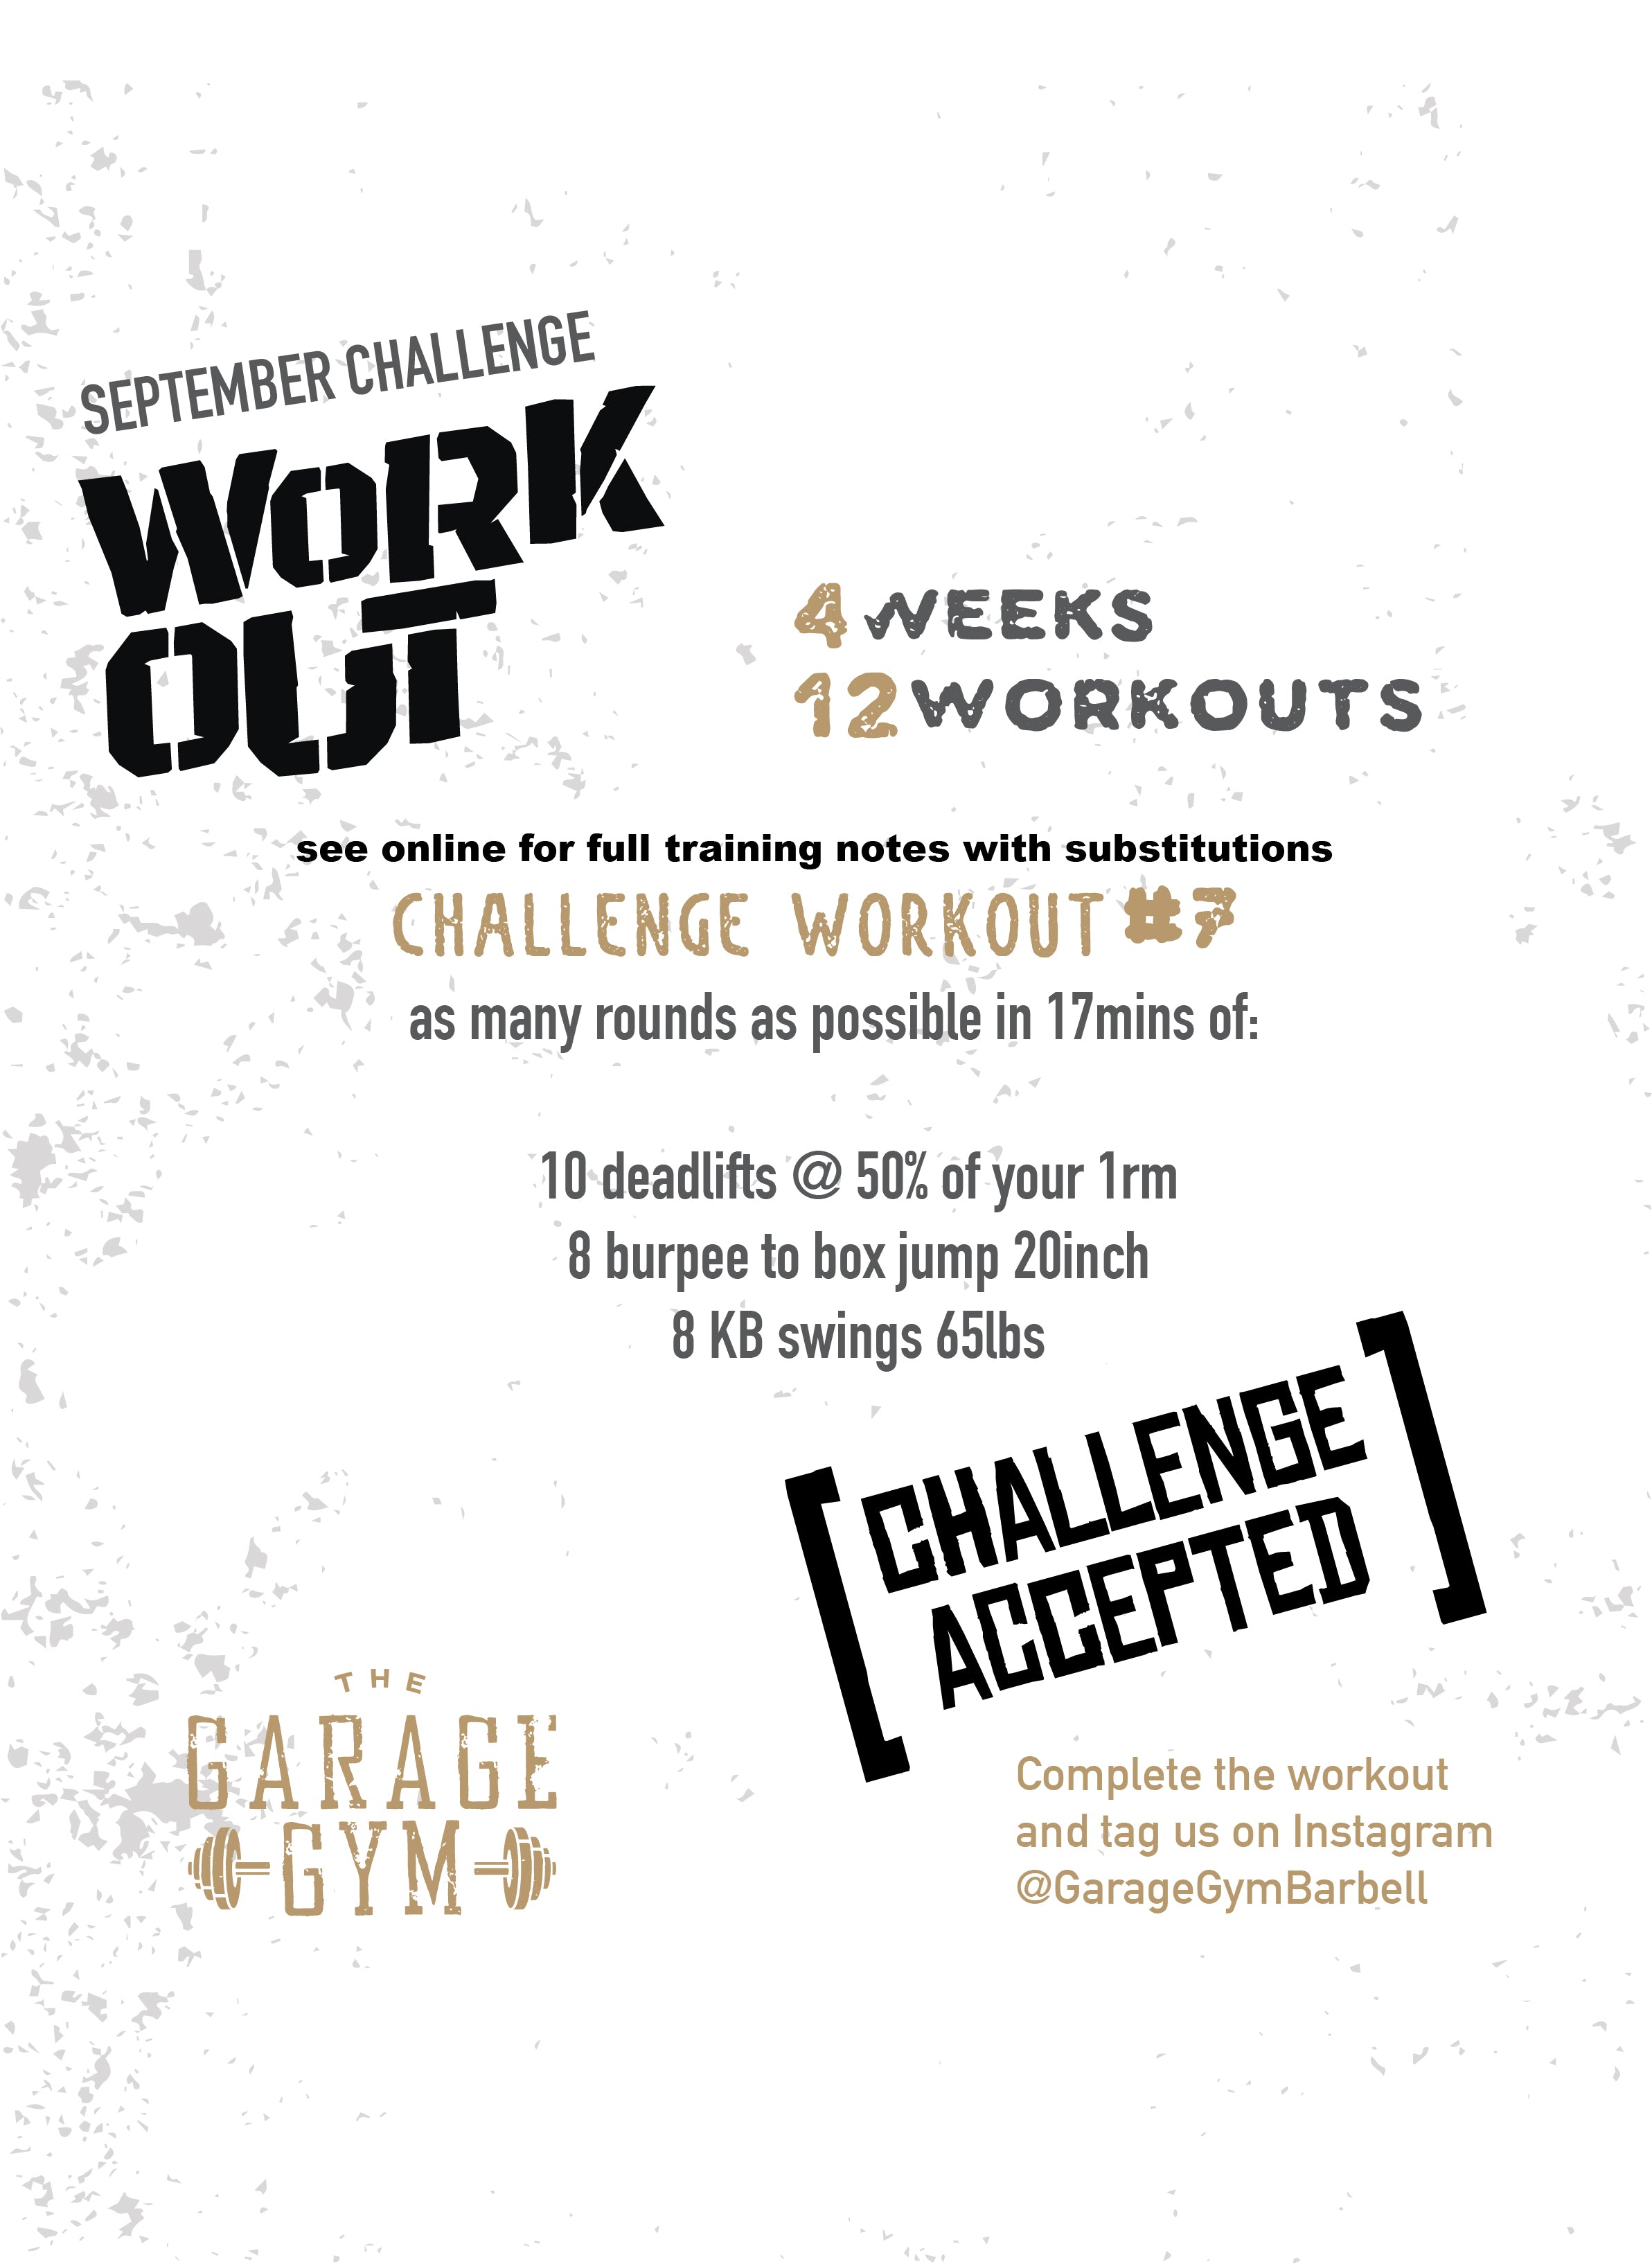 9-16-19 Heavy lower body & Challenge Workout #7